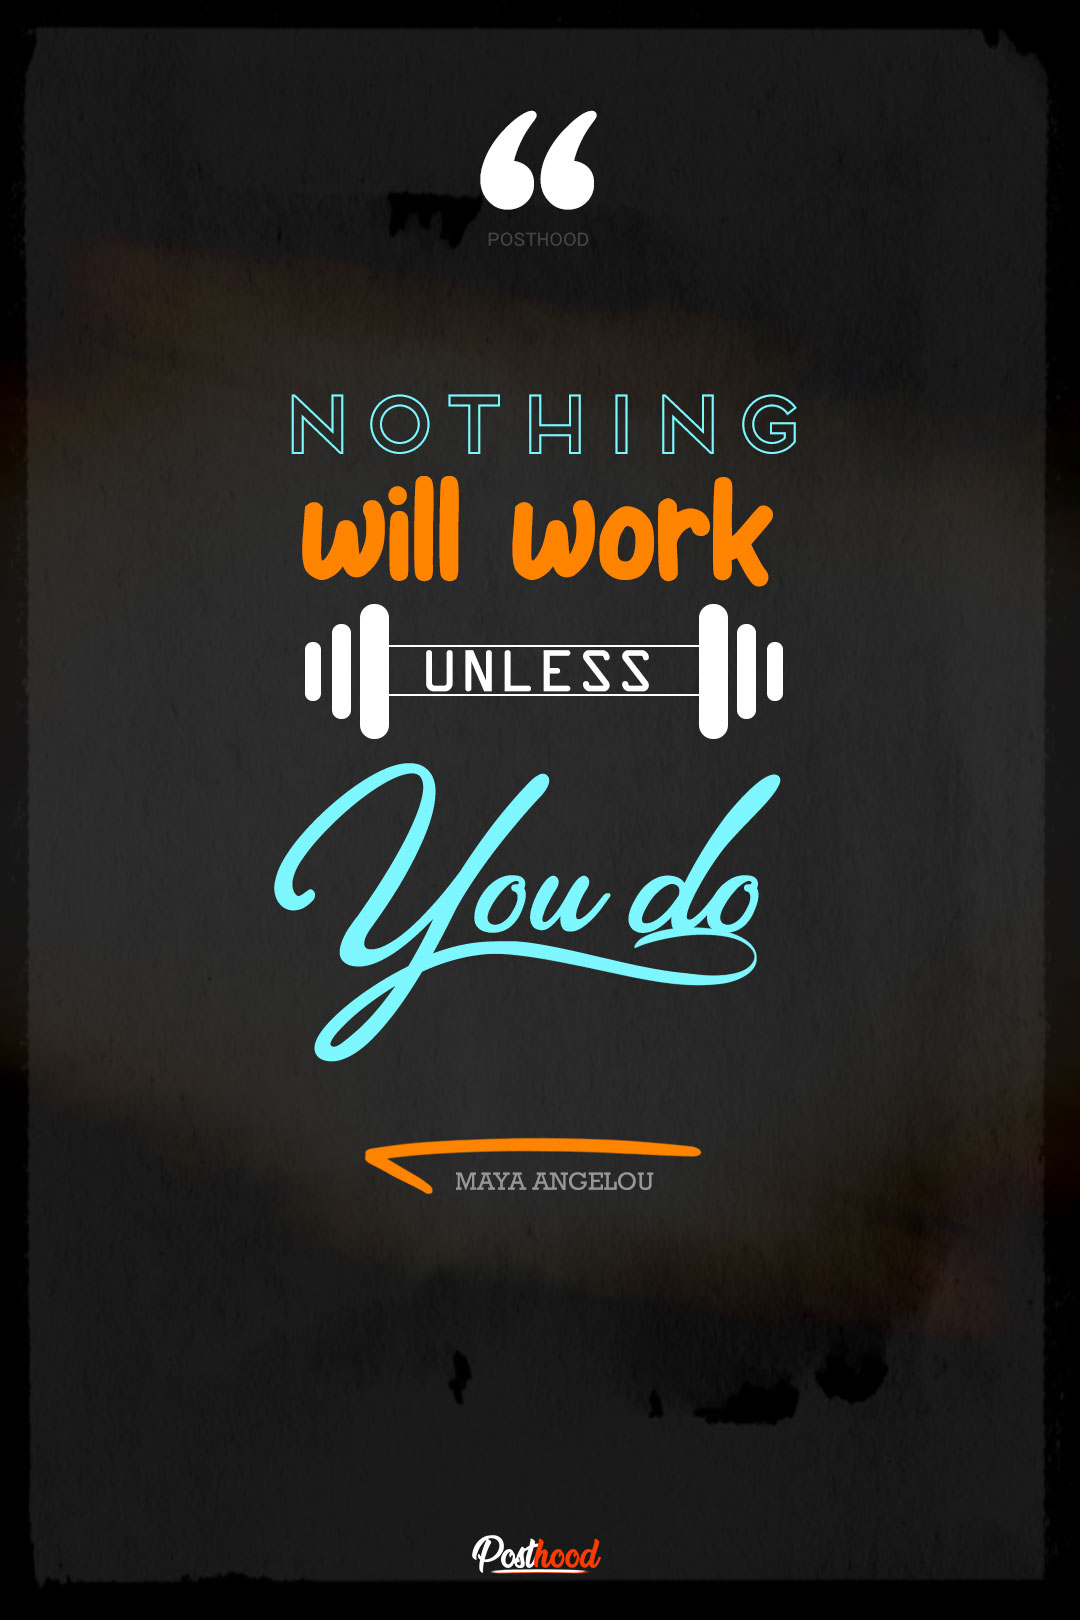 Workout wallpaper for iPhone, Fitness motivational quotes and phone wallpaper, Gym motivation wallpaper for mobile.